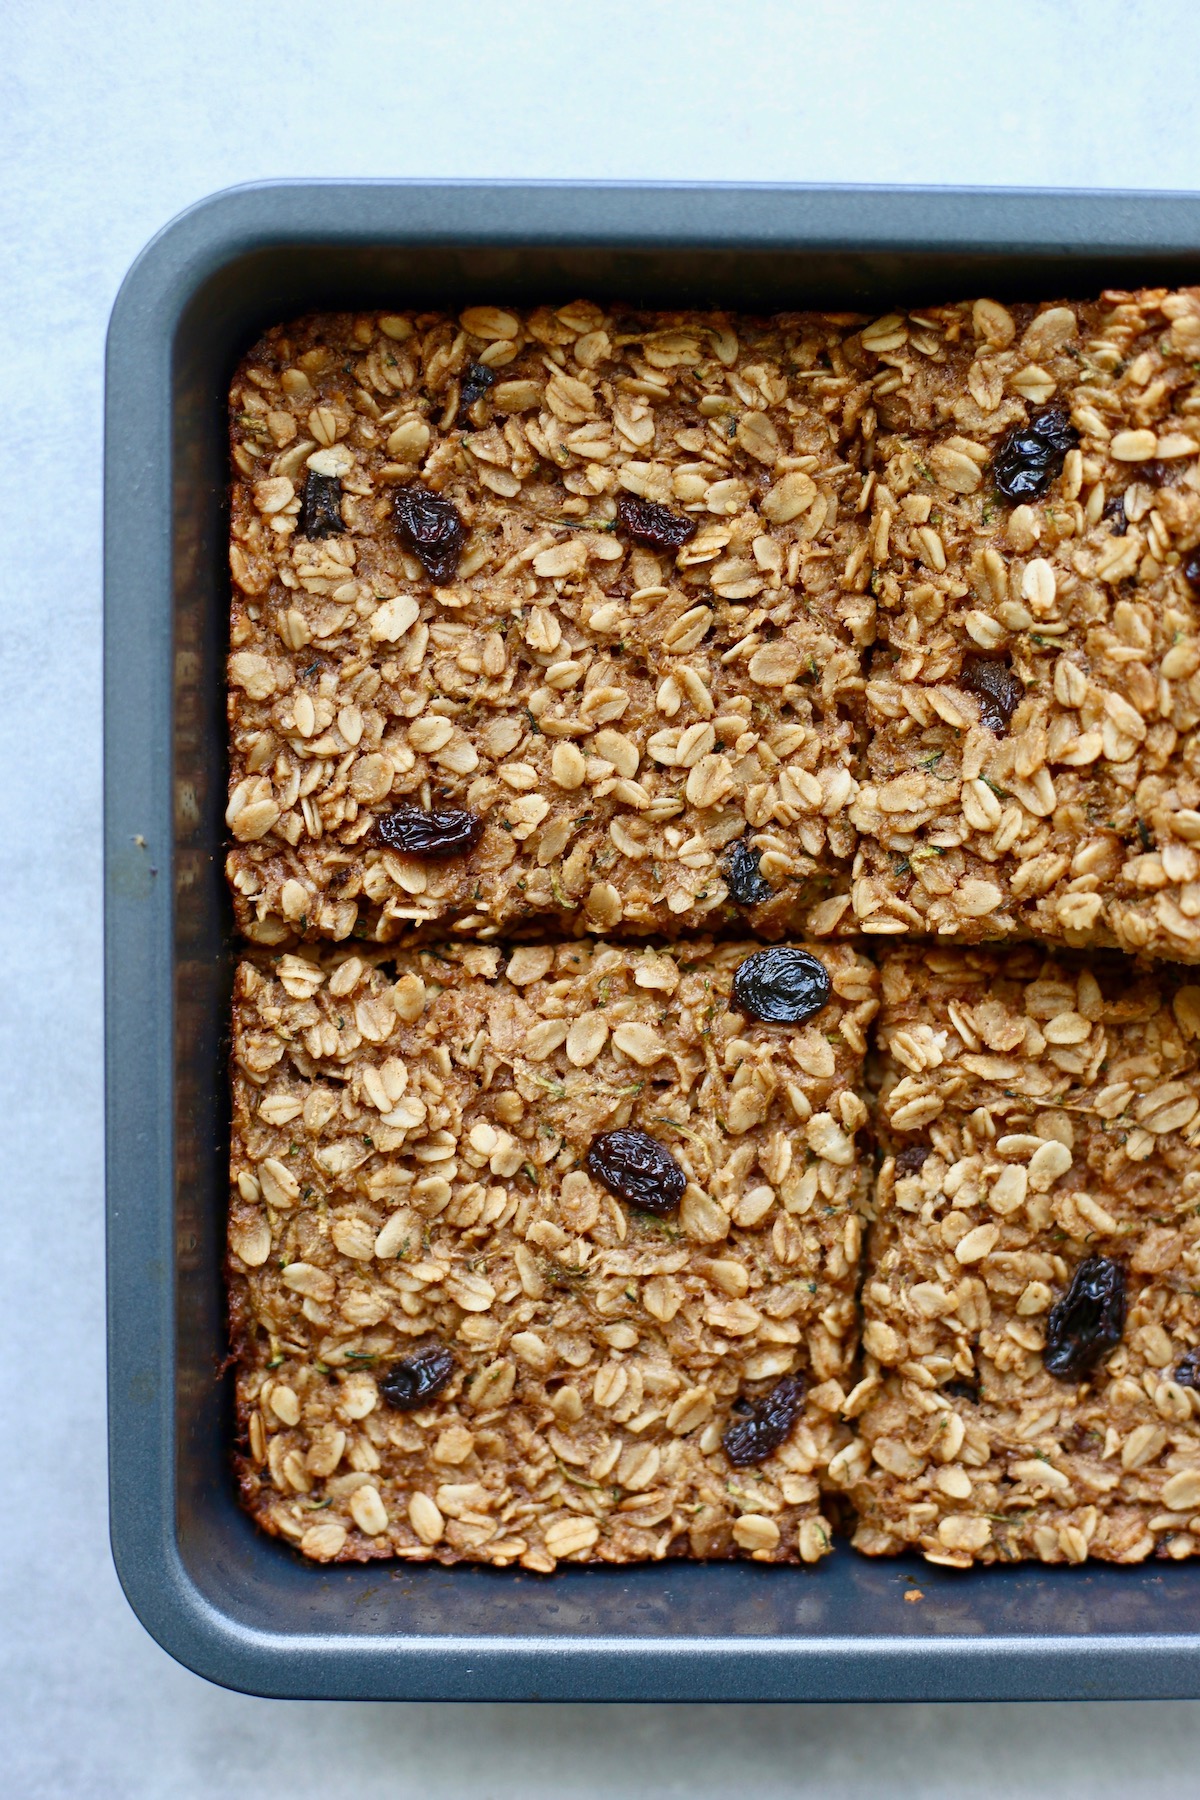 Bake and set aside the oatmeal dish